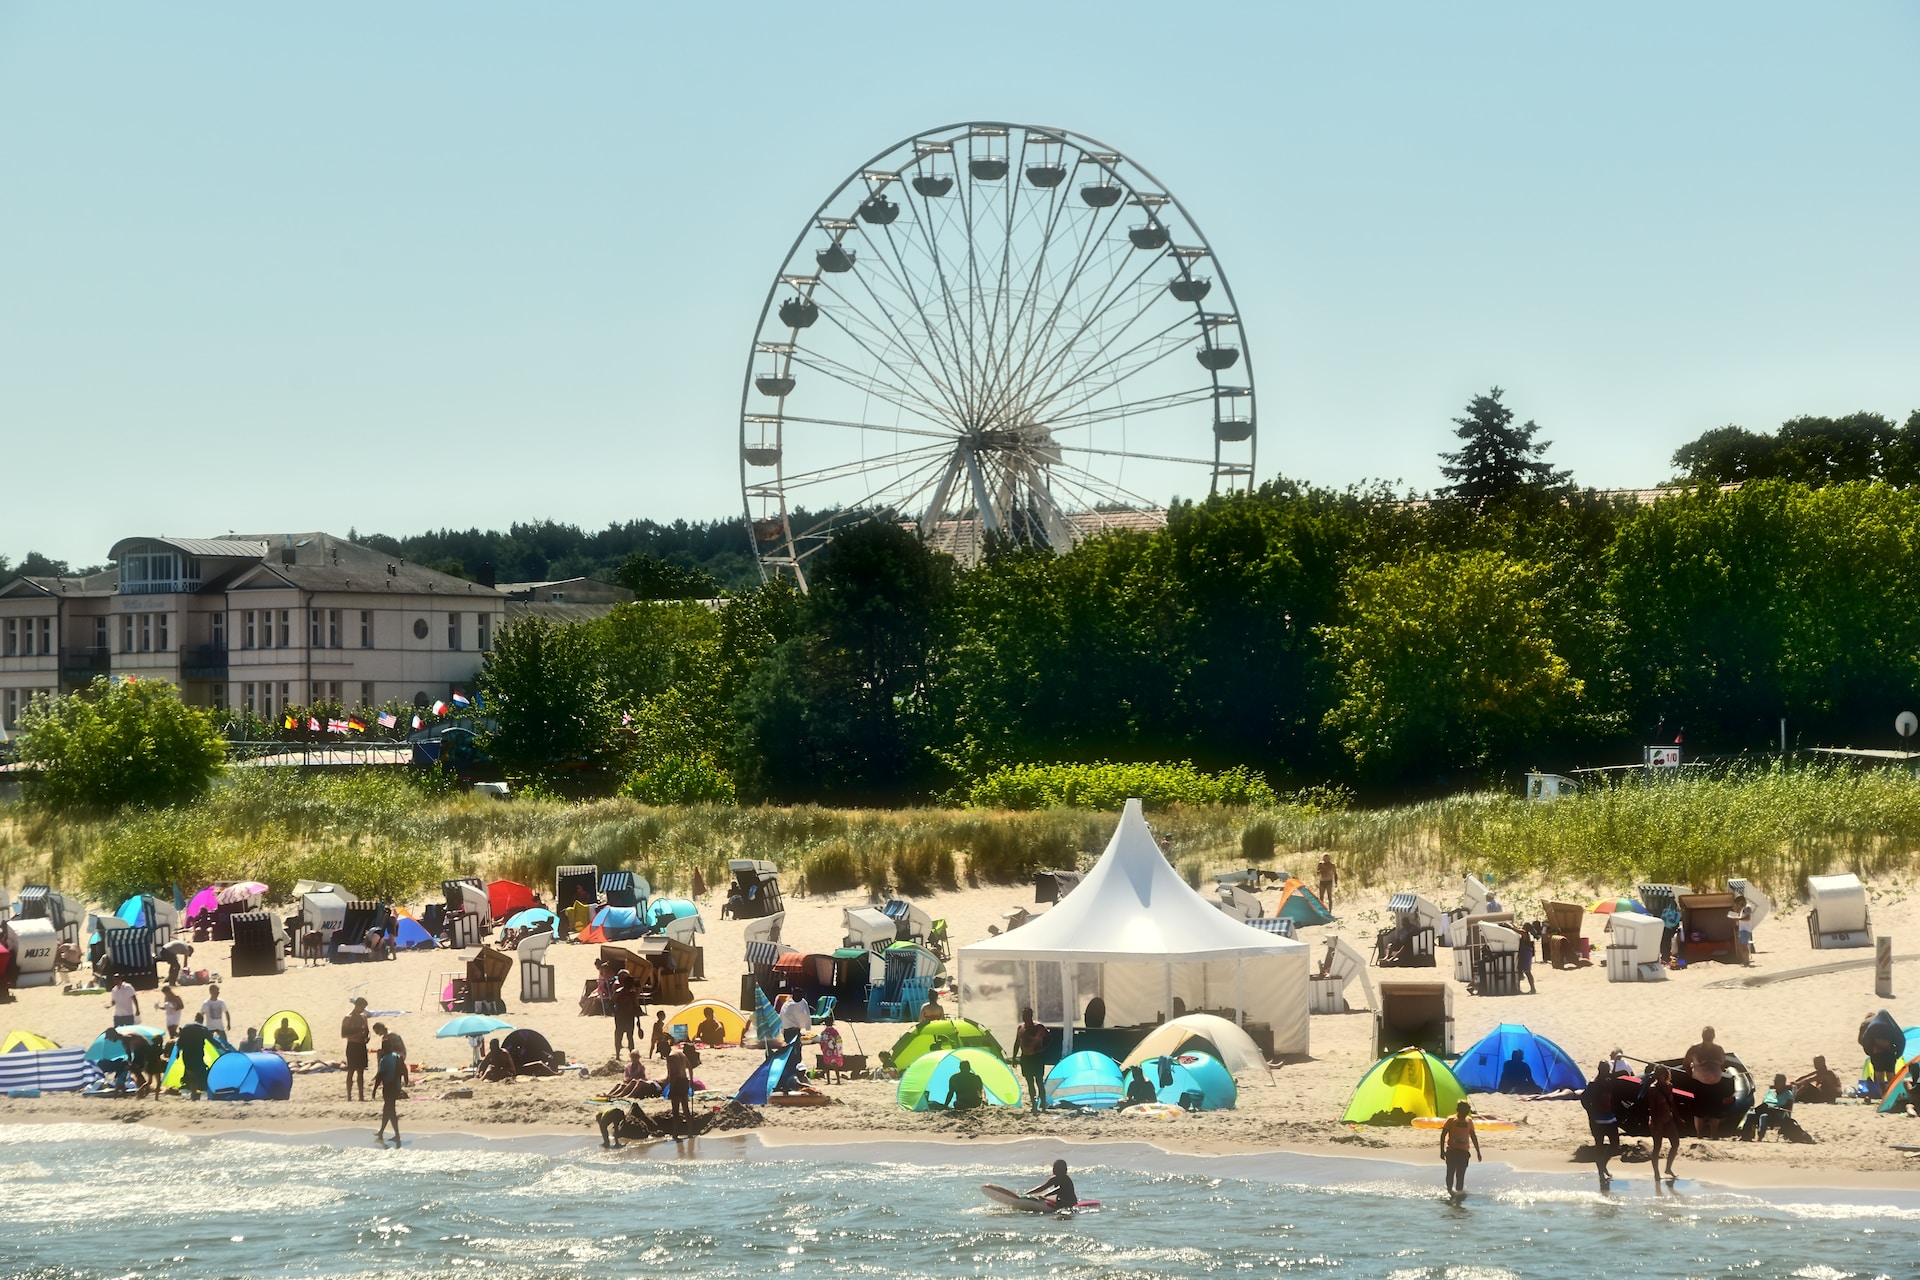 Beach Tent, Umbrella or Canopy: Which One Is Right for You?